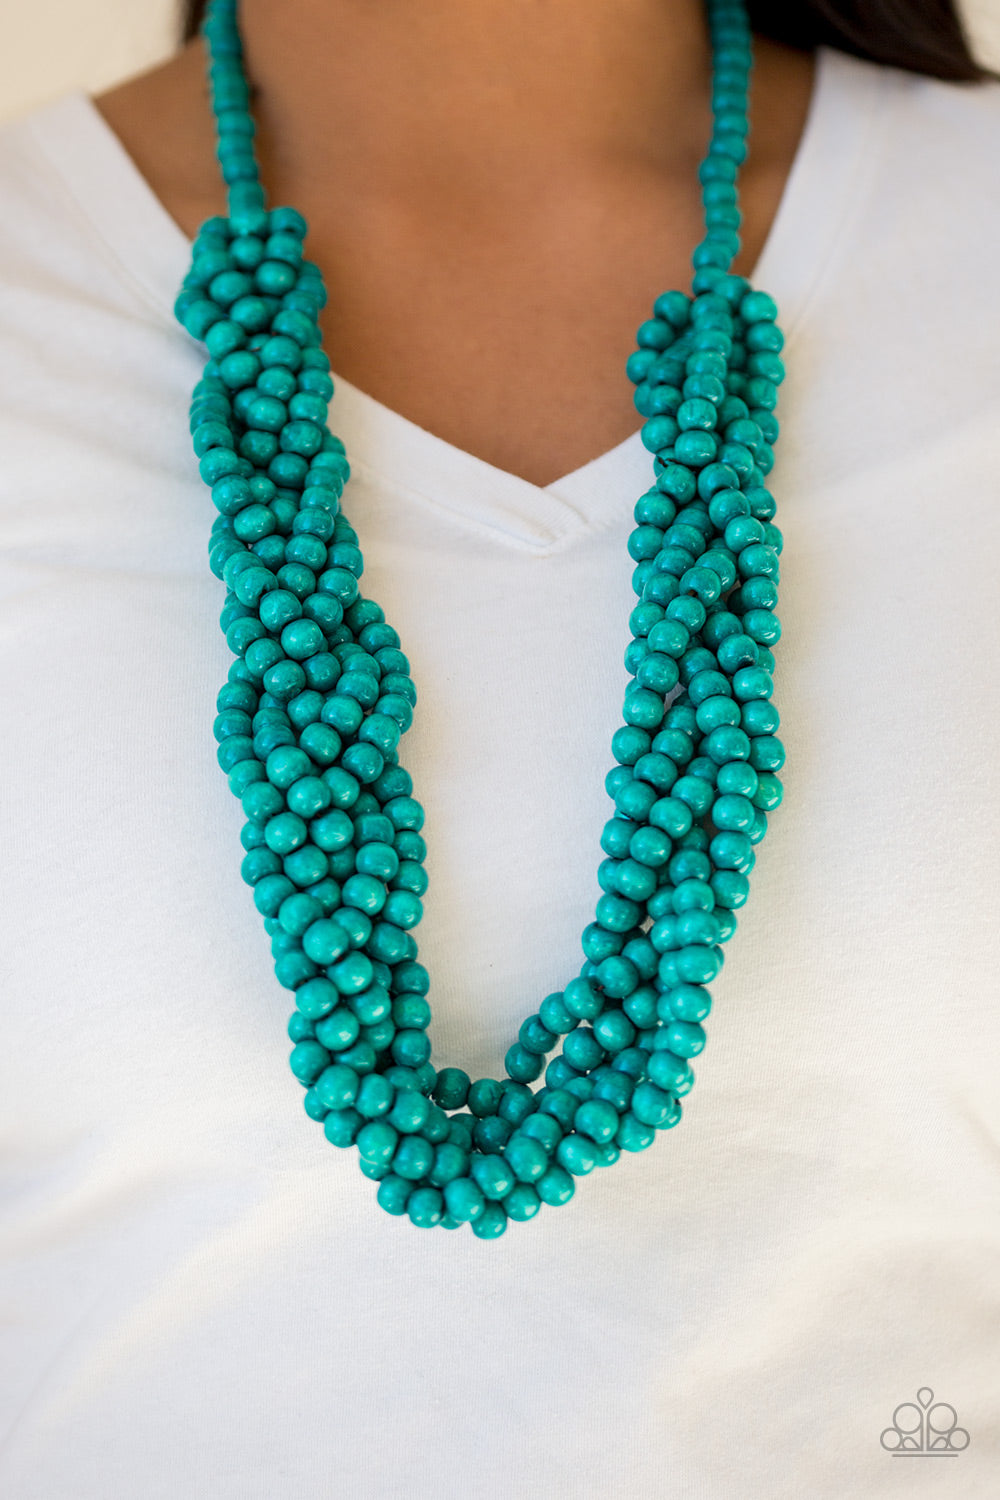 Paparazzi Accessories Tahiti Tropic - Blue Wood Necklaces - Lady T Accessories